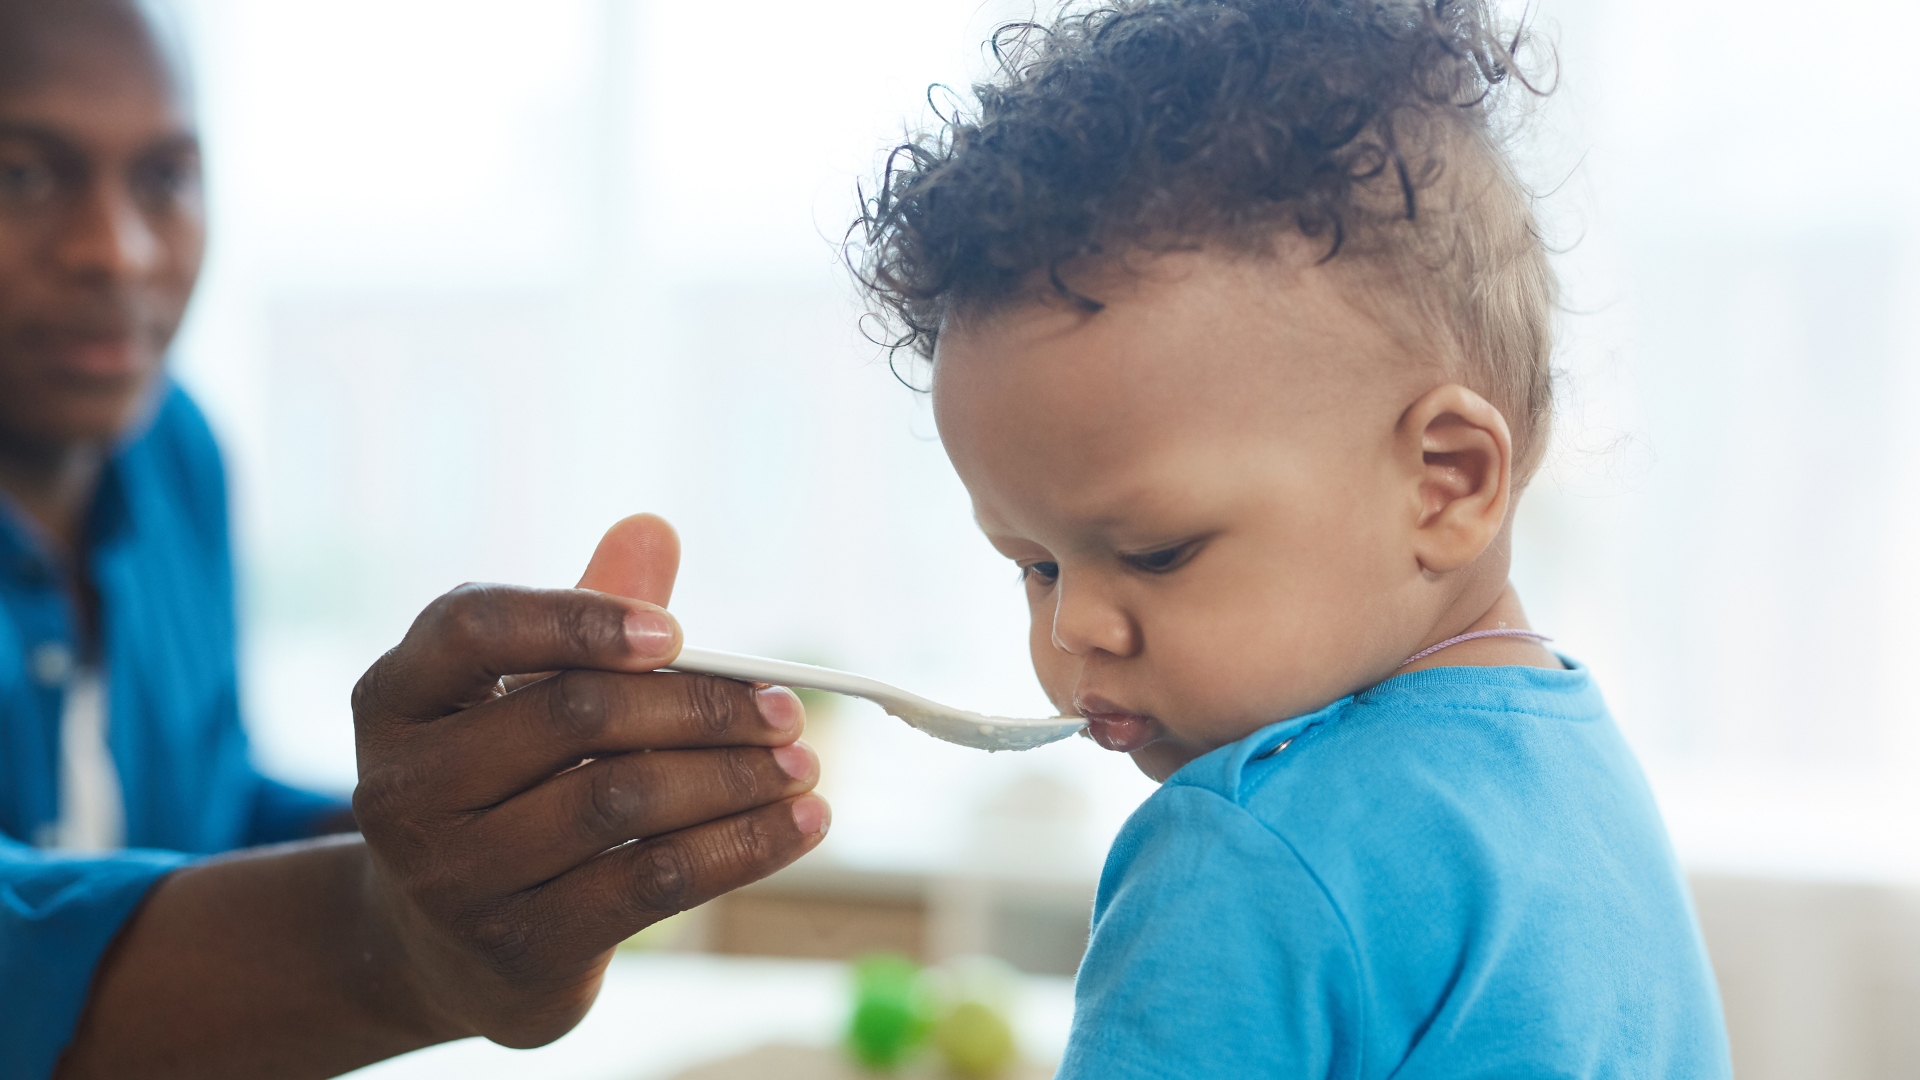 Toddler food refusal: Advice for parents